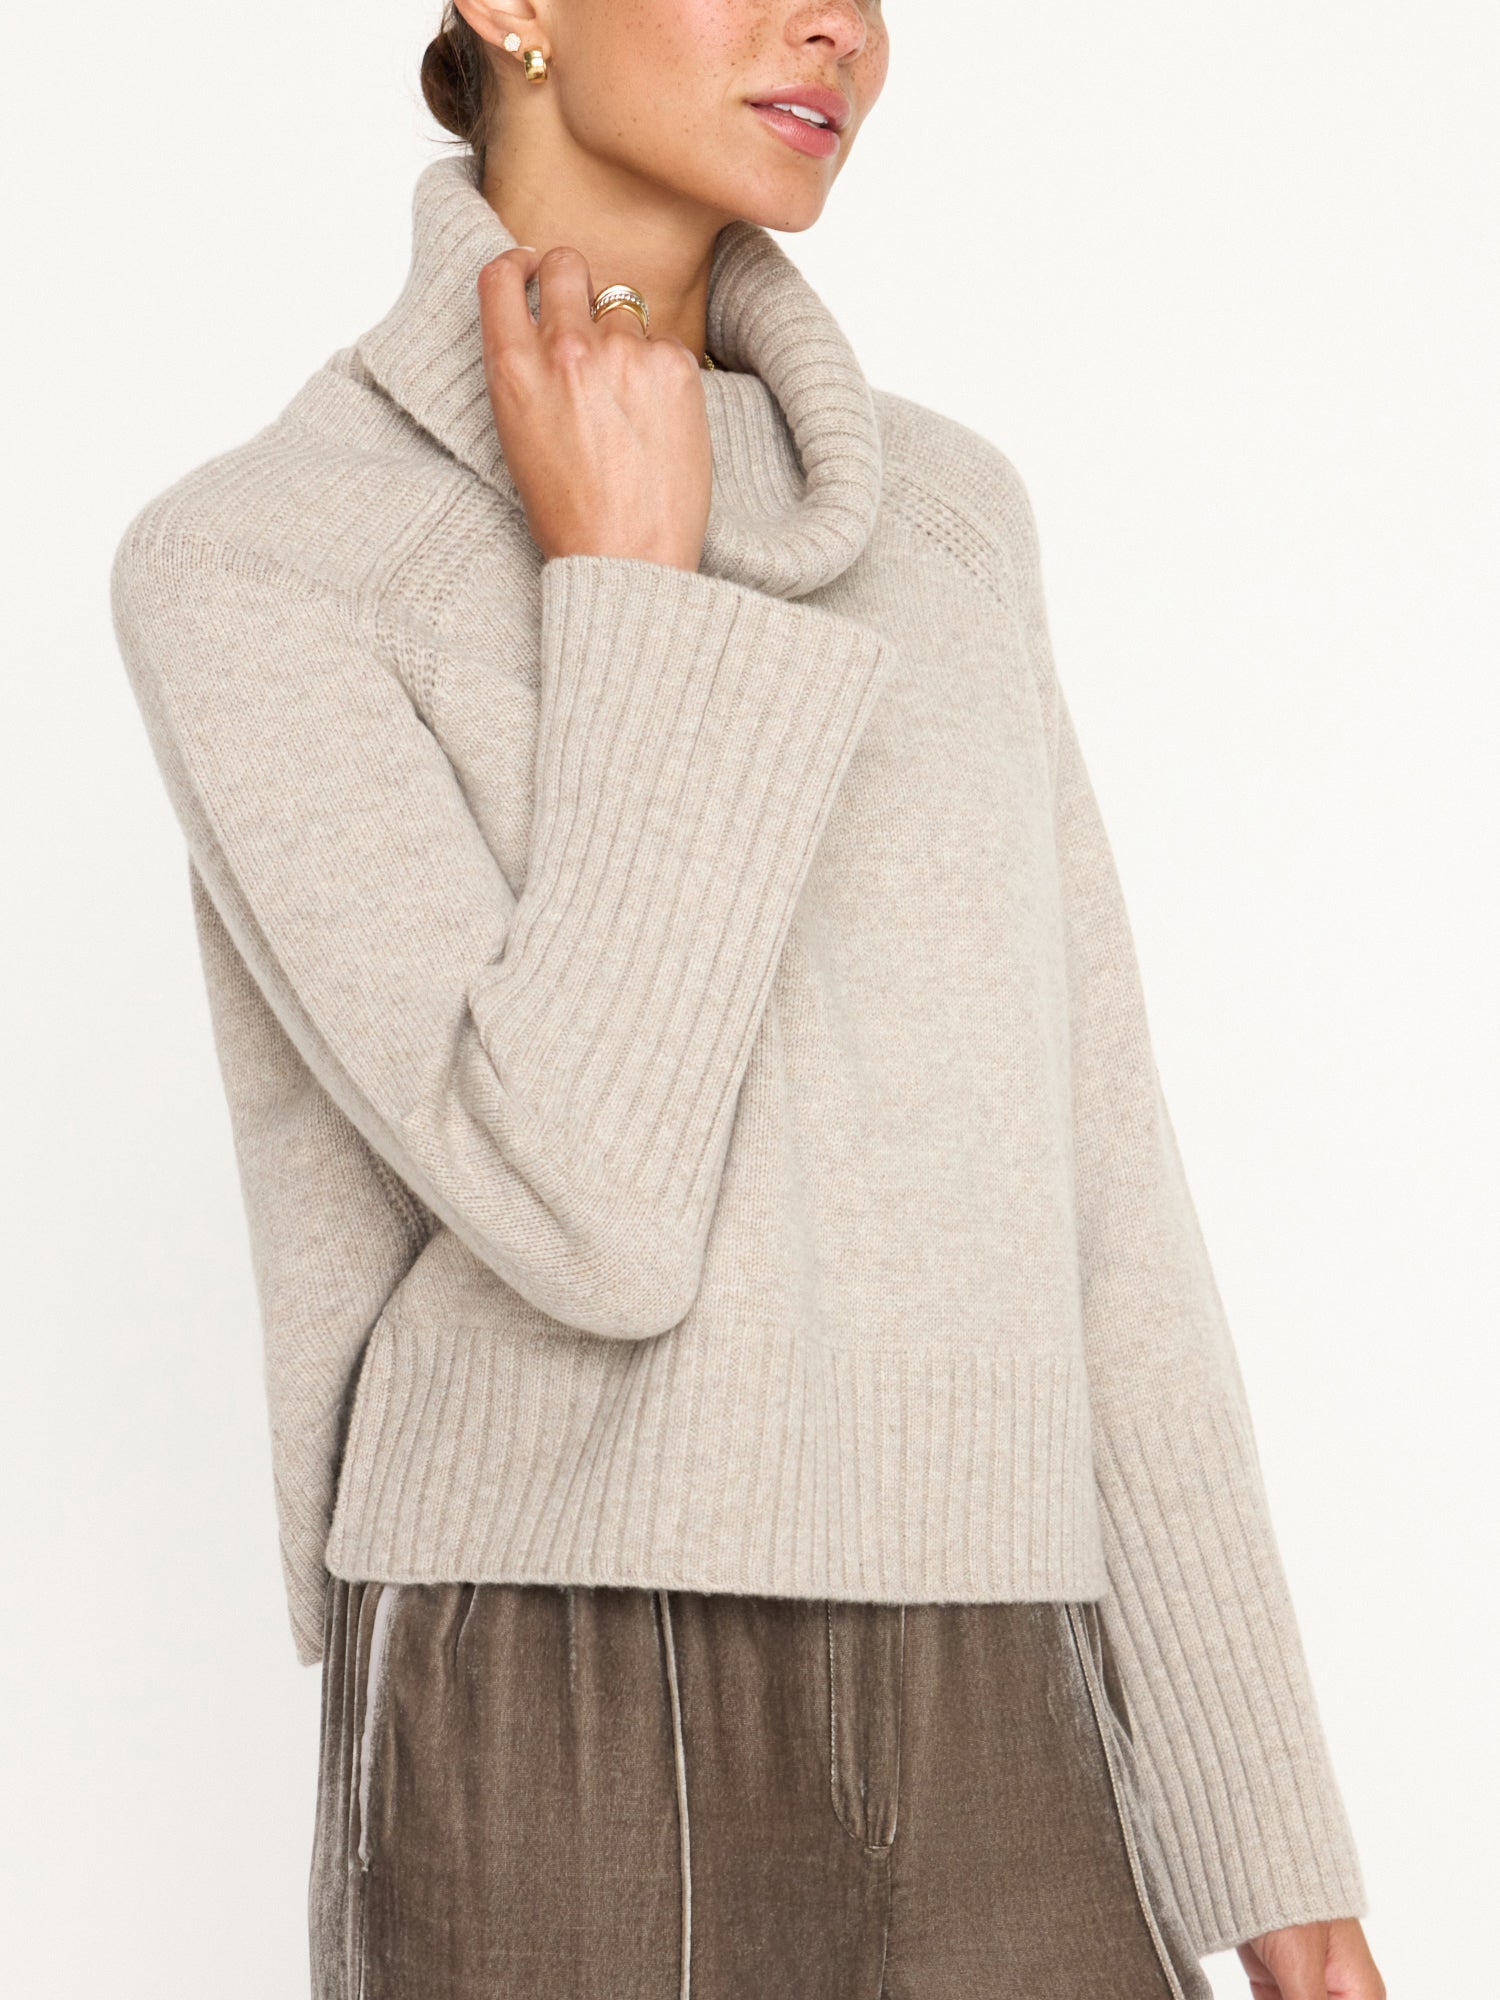 Orion cashmere-wool light grey turtleneck sweater side view